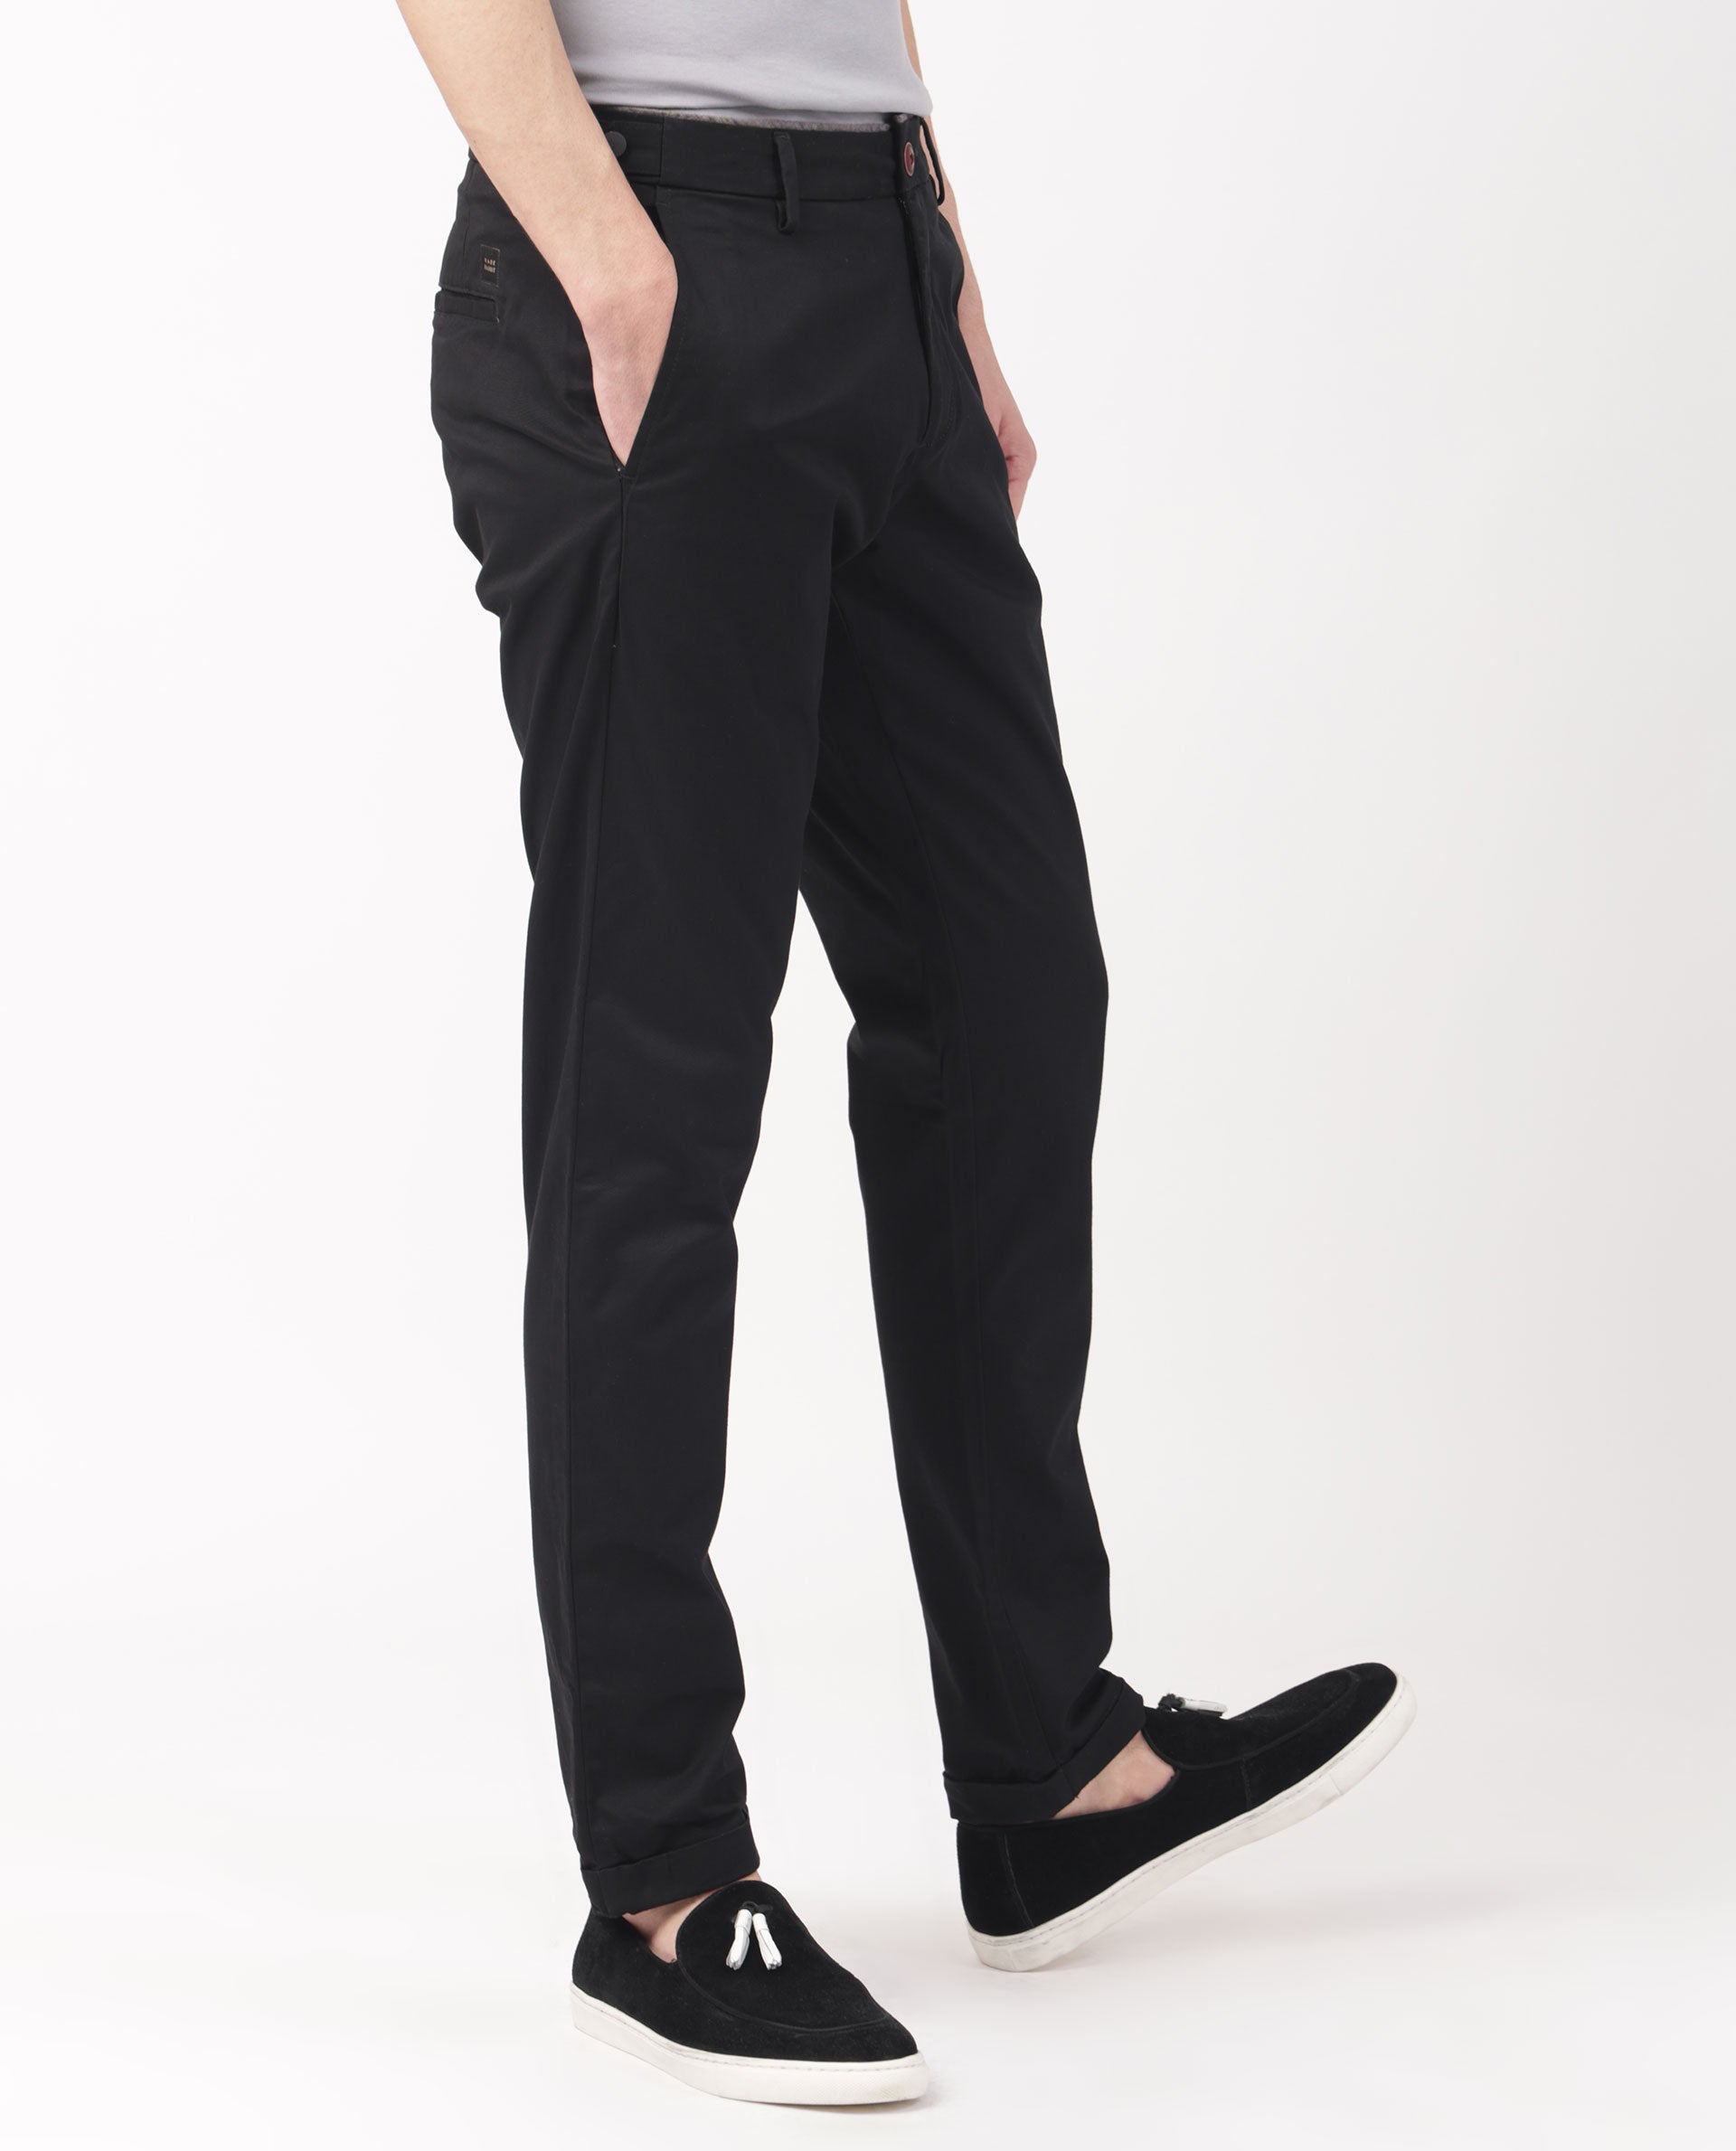 Buy Black Lady Womens Slim fit Cotton Lycra Black Trouser PantSemi Casual  Trouser for WomenWomens Trouser for Daily Office and Casual Wear  2  PocketsL5XL at Amazonin